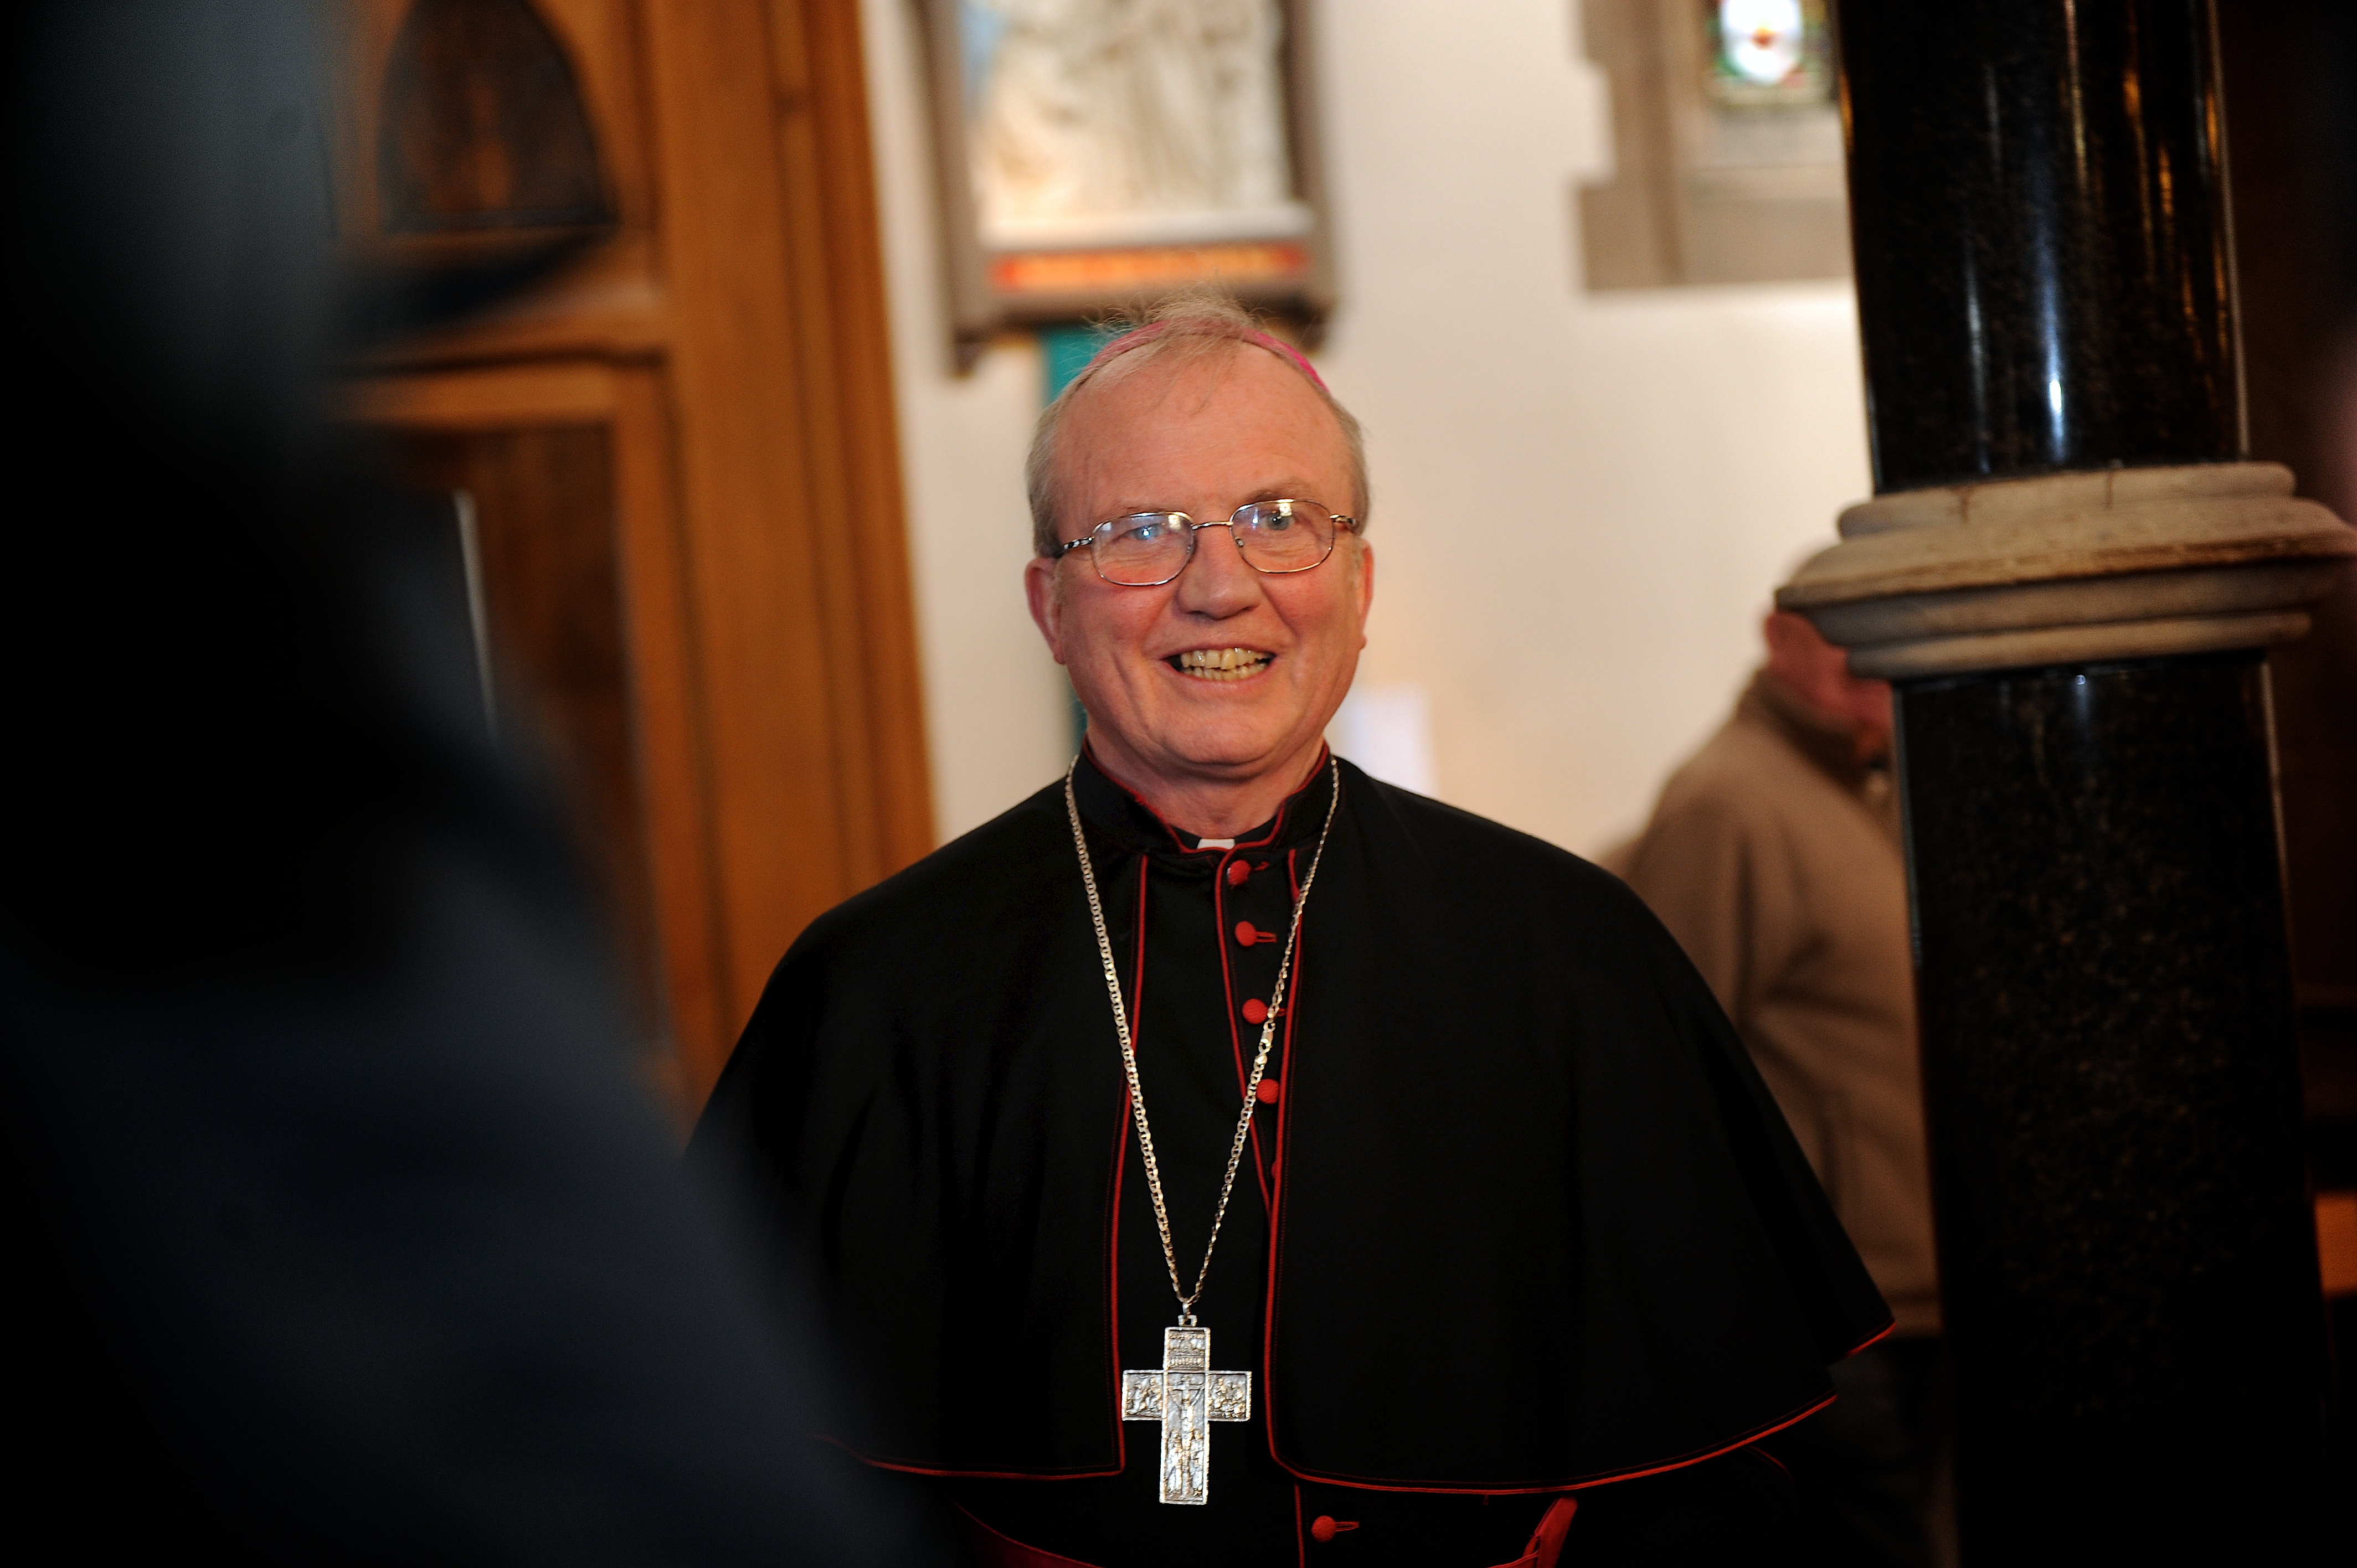 25 Feb 2014 appointment of Bishop Donal McKeown as Bishop of derry